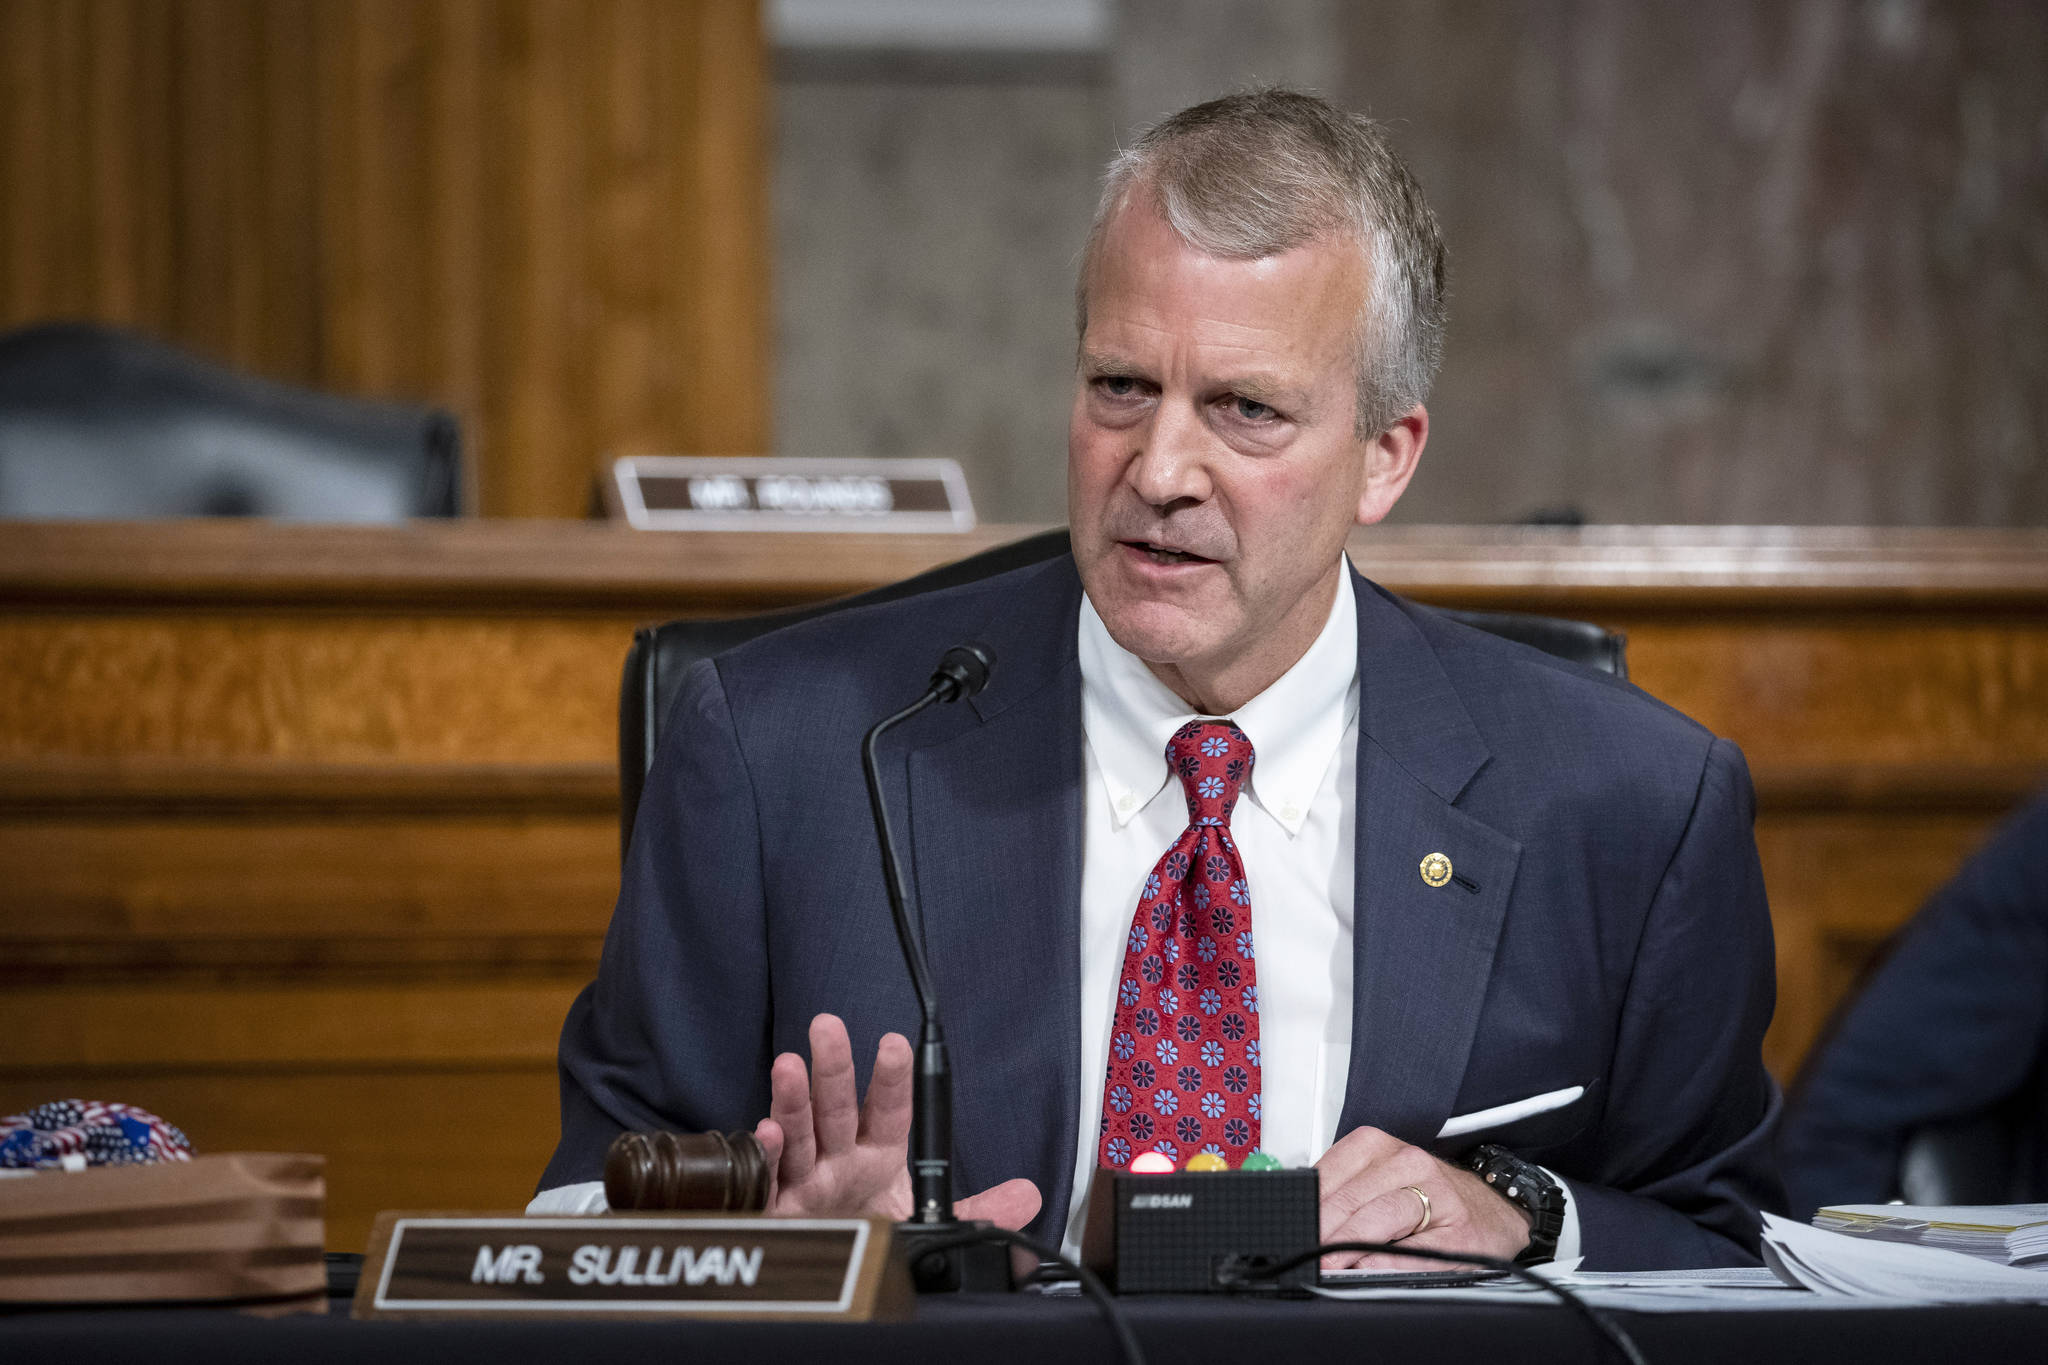 Sen. Dan Sullivan, R-Alaska, testifies during a hearing on Capitol Hill in Washington. Sen. Al Gross, an independent running with Democratic support, is challenging Sullivan in Alaska, a state that has long been a GOP stronghold. Across the country, Republicans are nervous about Senate seats like Sullivan's they once thought safe as Democrats hope to capitalize on President Donald Trump's unpopularity to retake the chamber. (Al Drago / Pool)